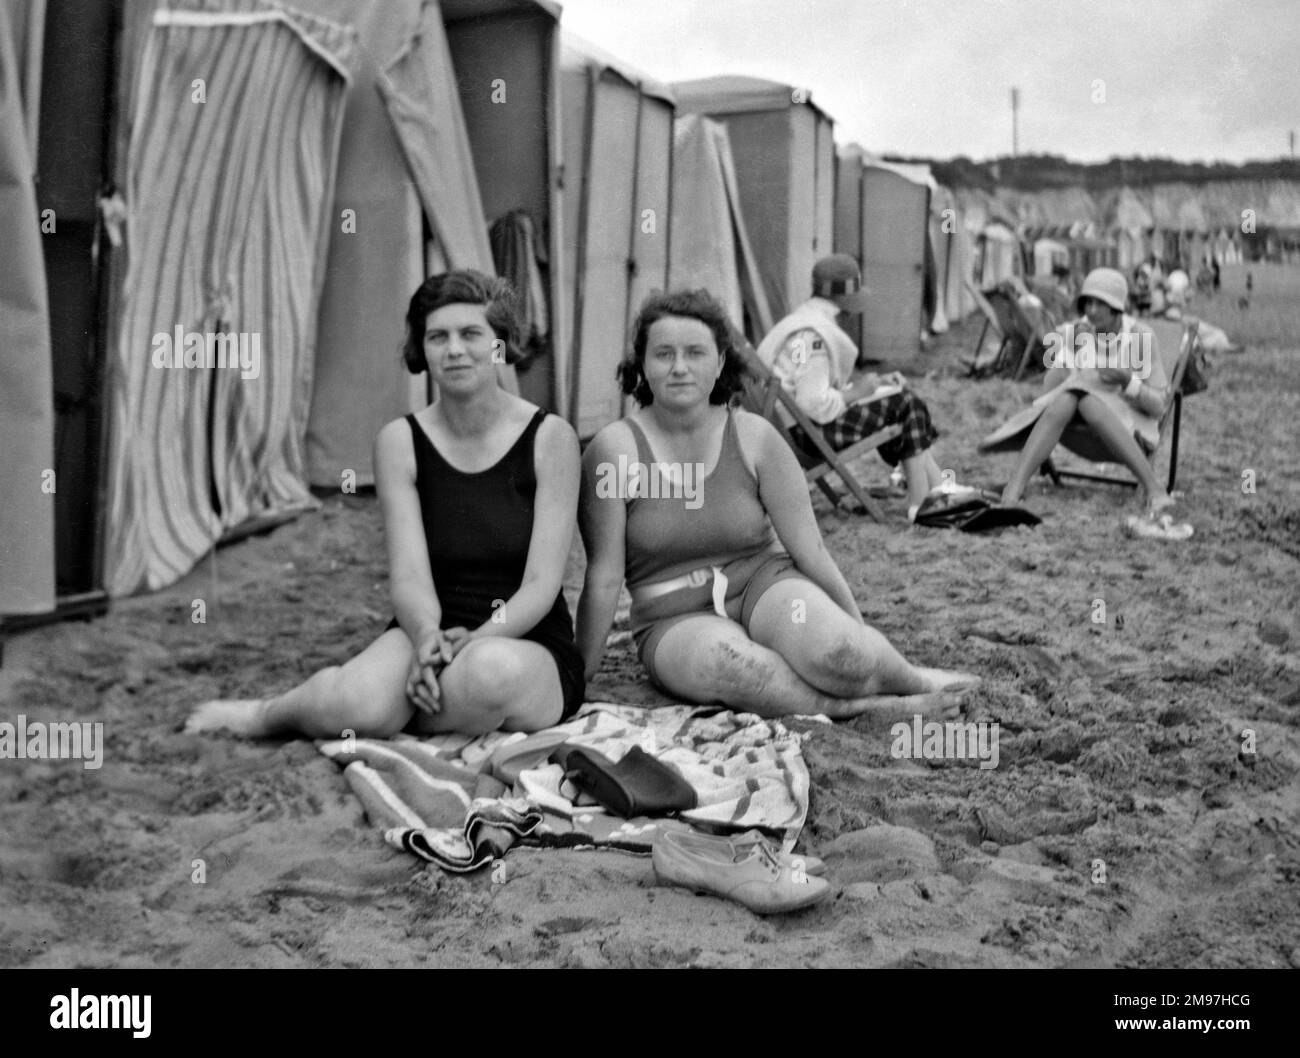 https://c8.alamy.com/comp/2M97HCG/women-sitting-on-a-beach-at-a-seaside-resort-with-a-row-of-bathing-tents-nearby-2M97HCG.jpg